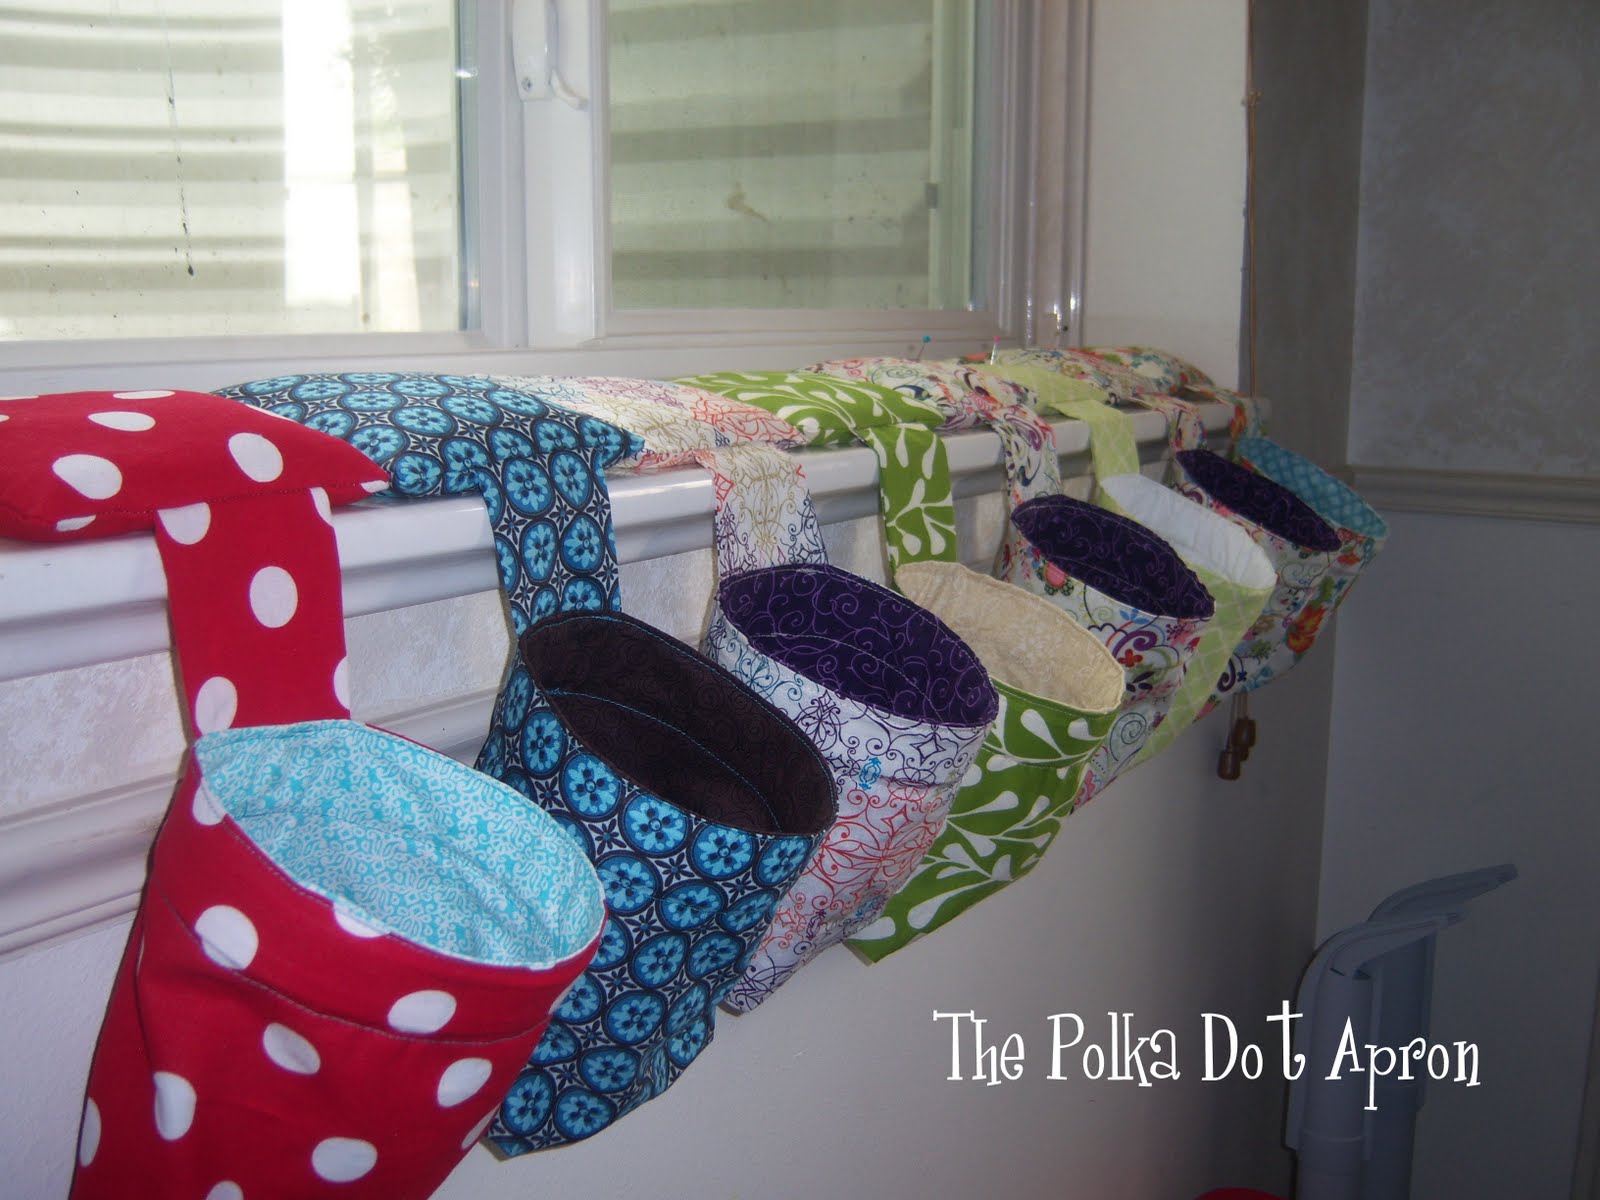 How to make a pincushion thread catcher free pattern